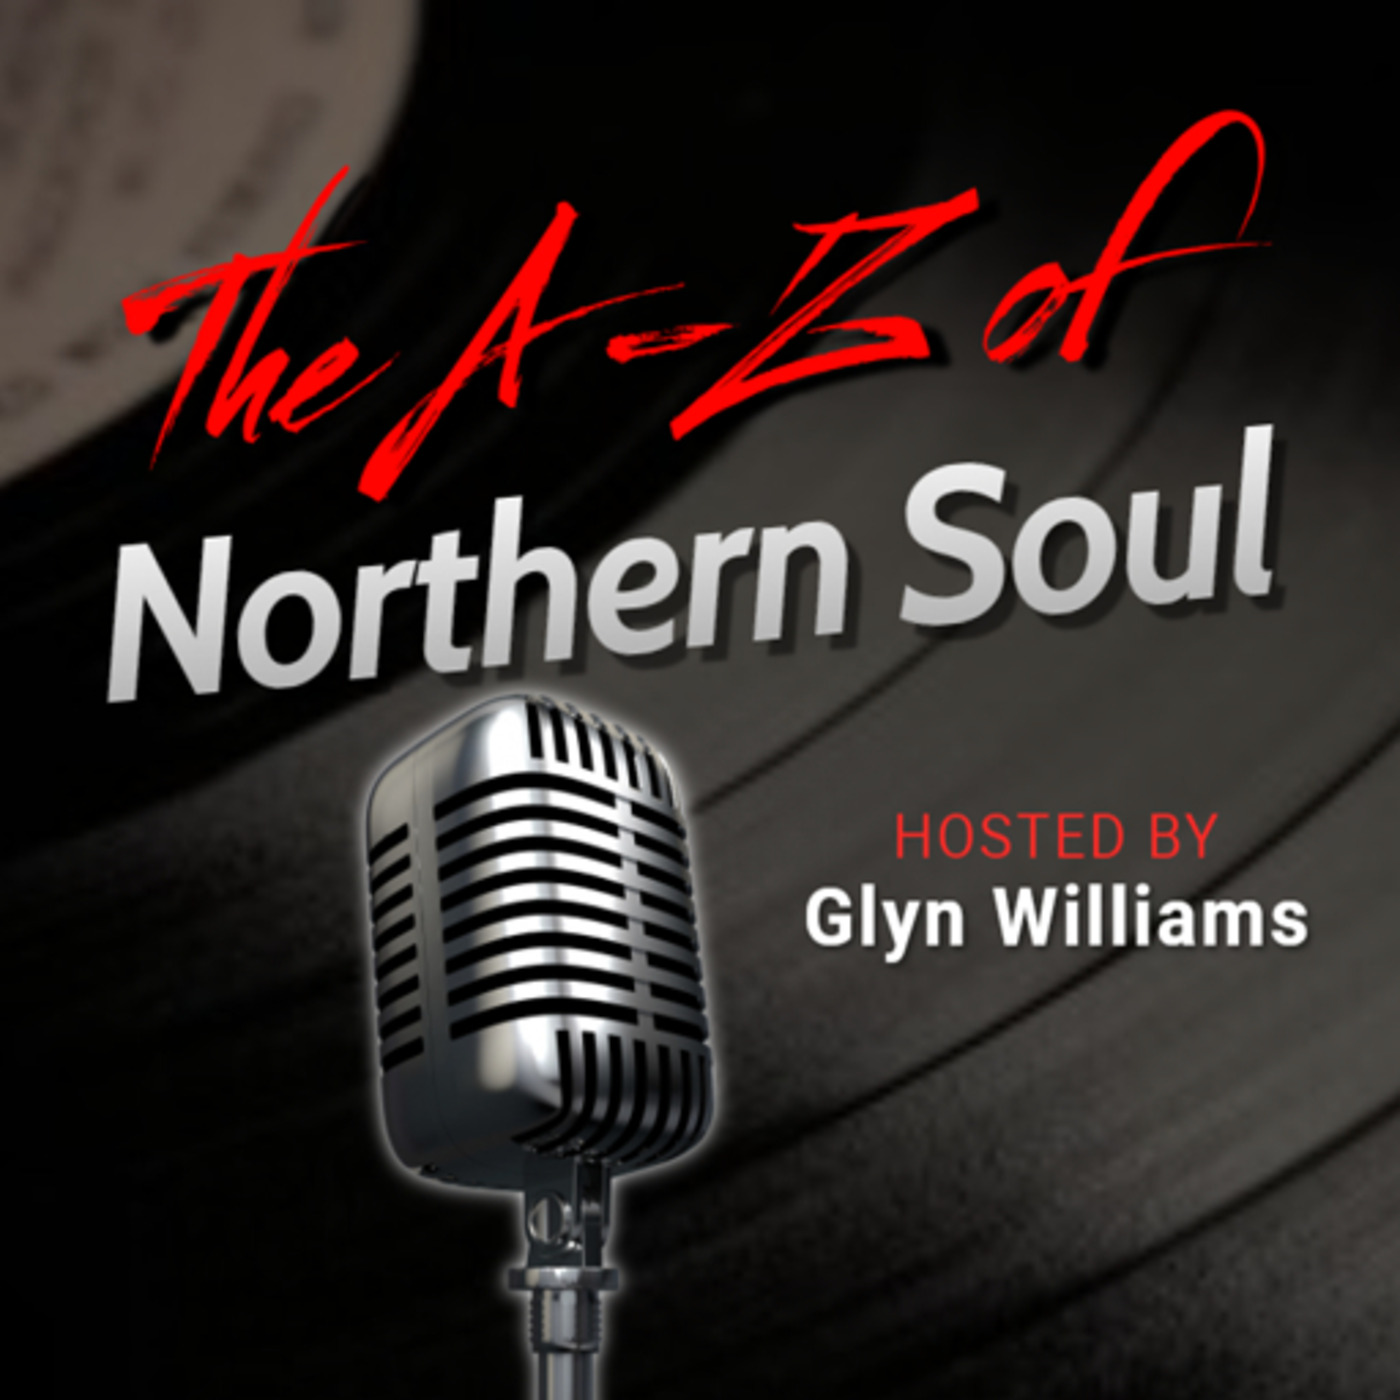 The A-Z of Northern Soul E063